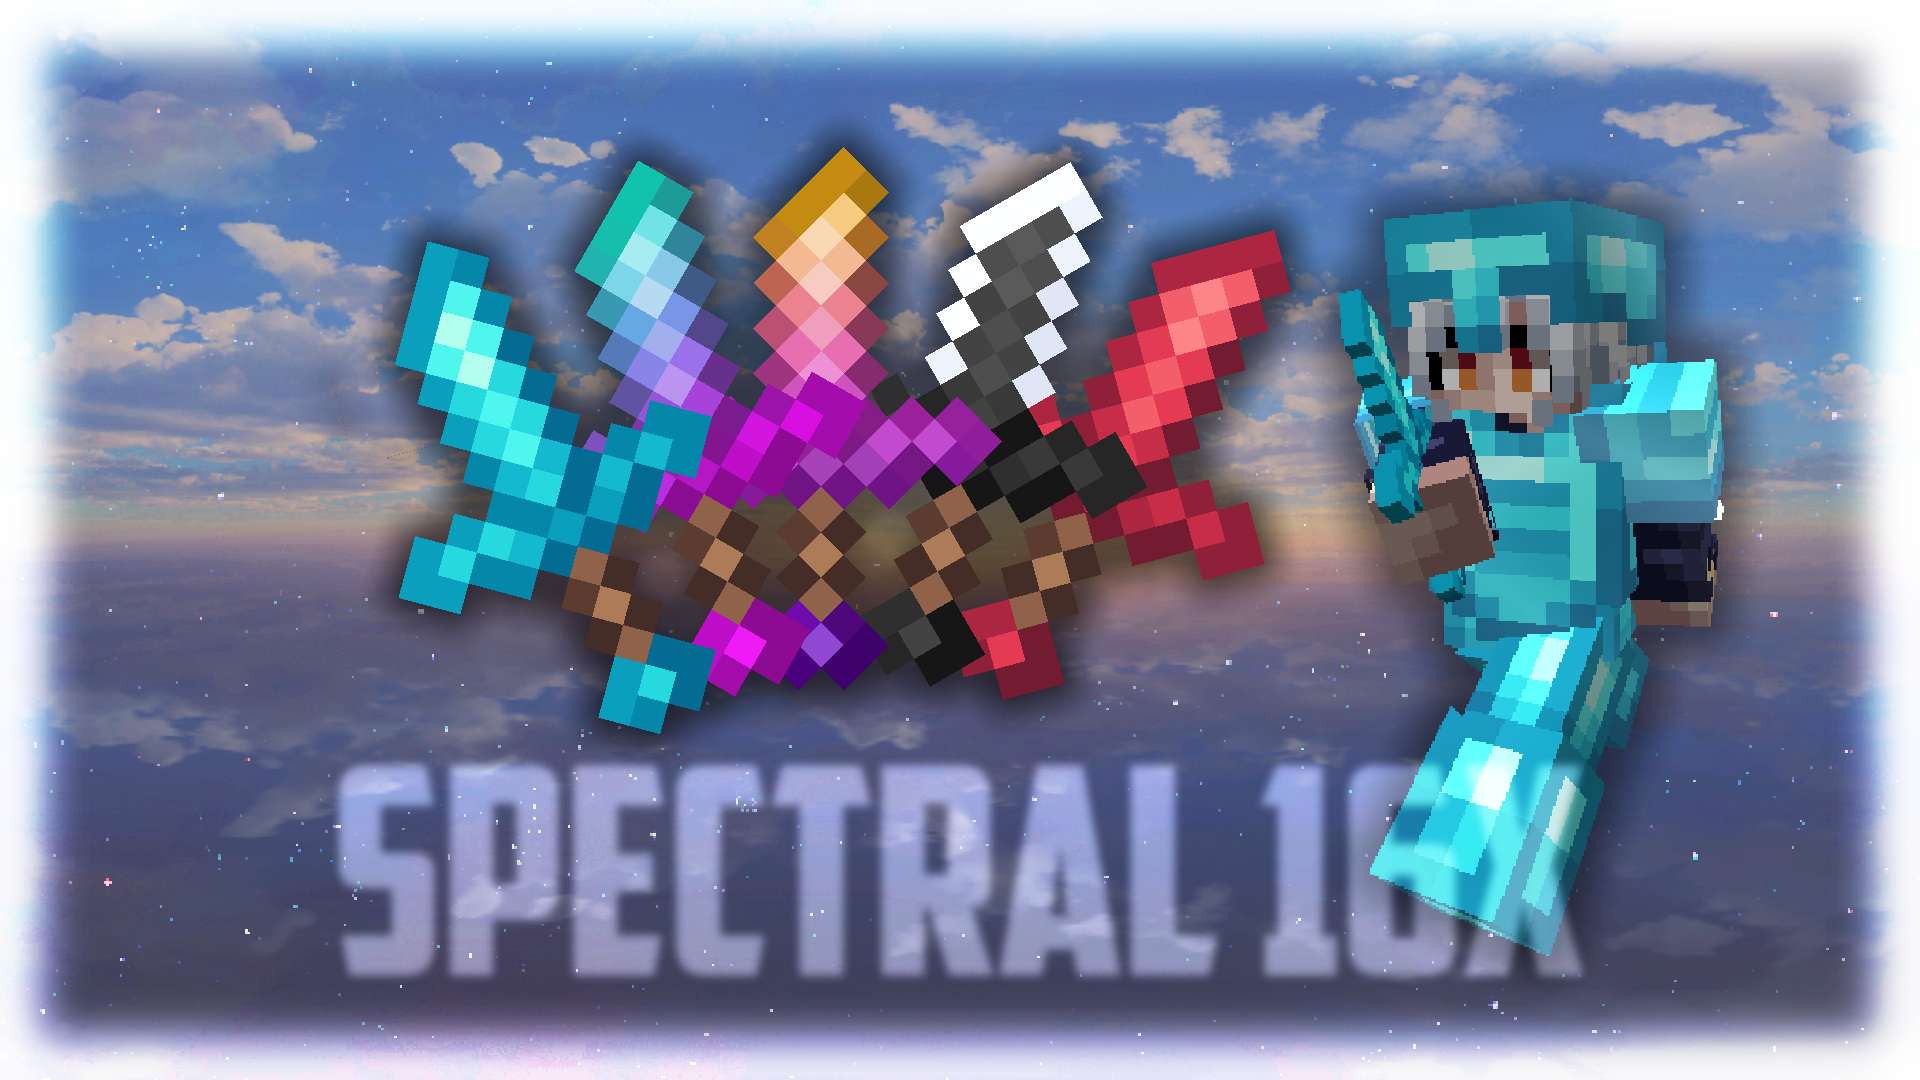 Spectral - Default 16 by Zlax on PvPRP